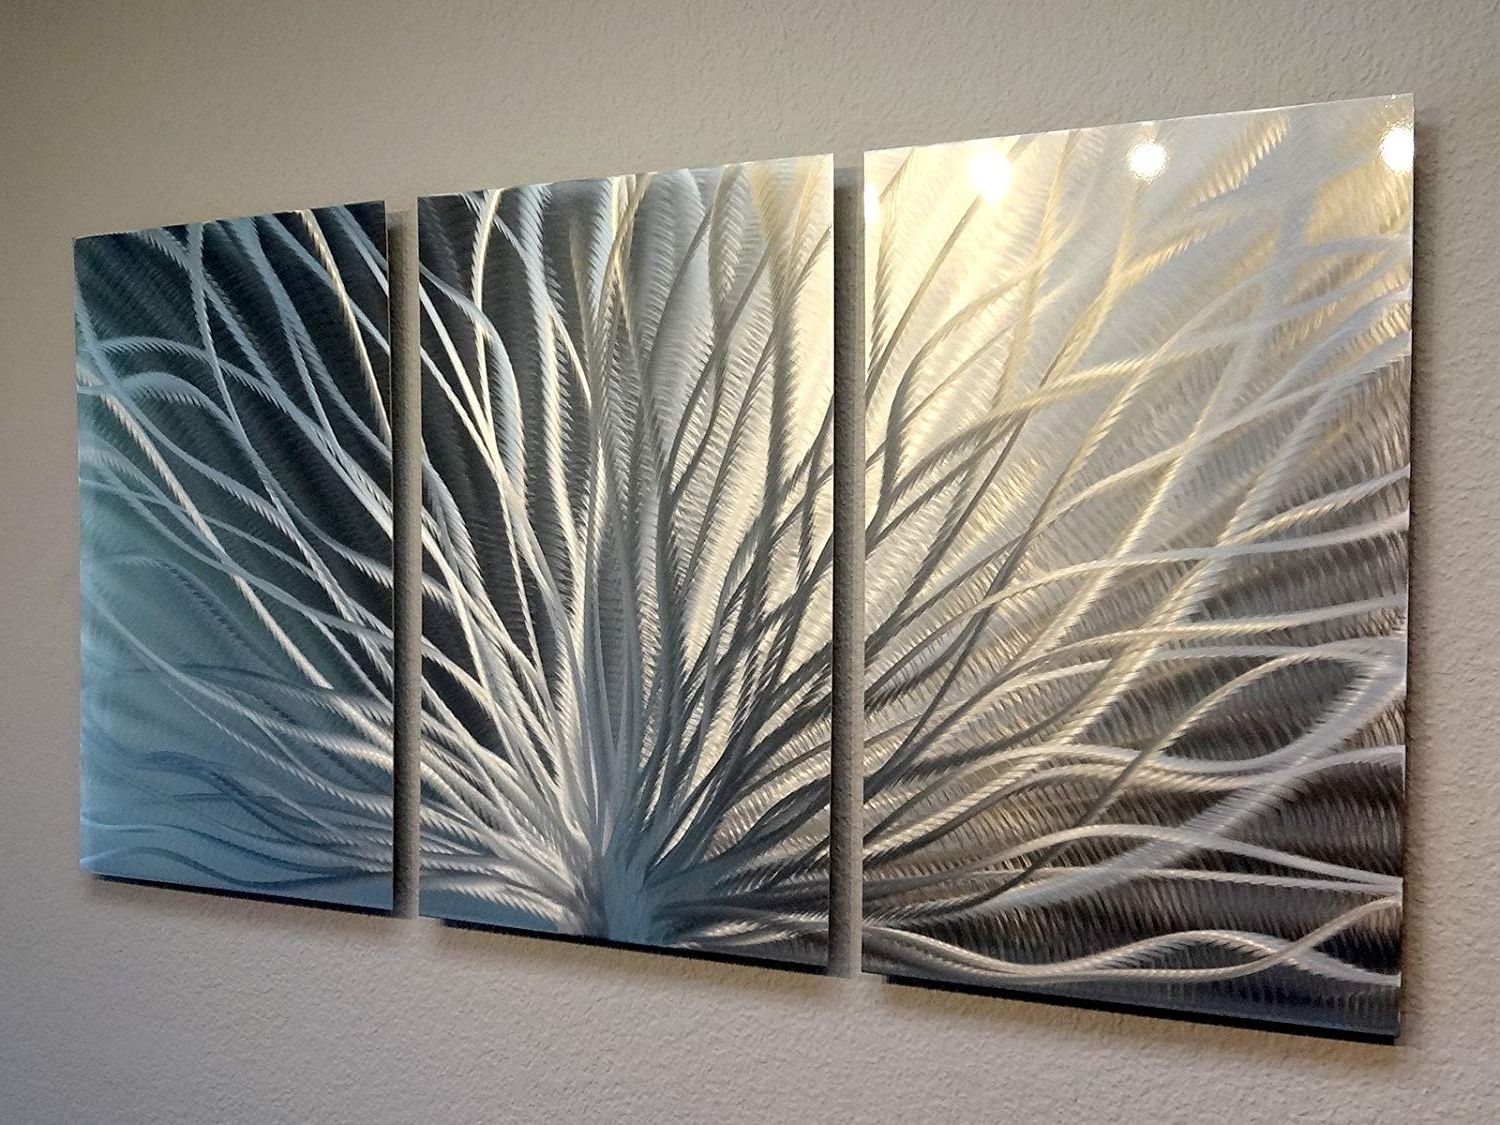 Latest Metal Wall Art Panels With Regard To Amazon: Miles Shay Metal Wall Art, Modern Home Decor, Abstract (View 5 of 20)